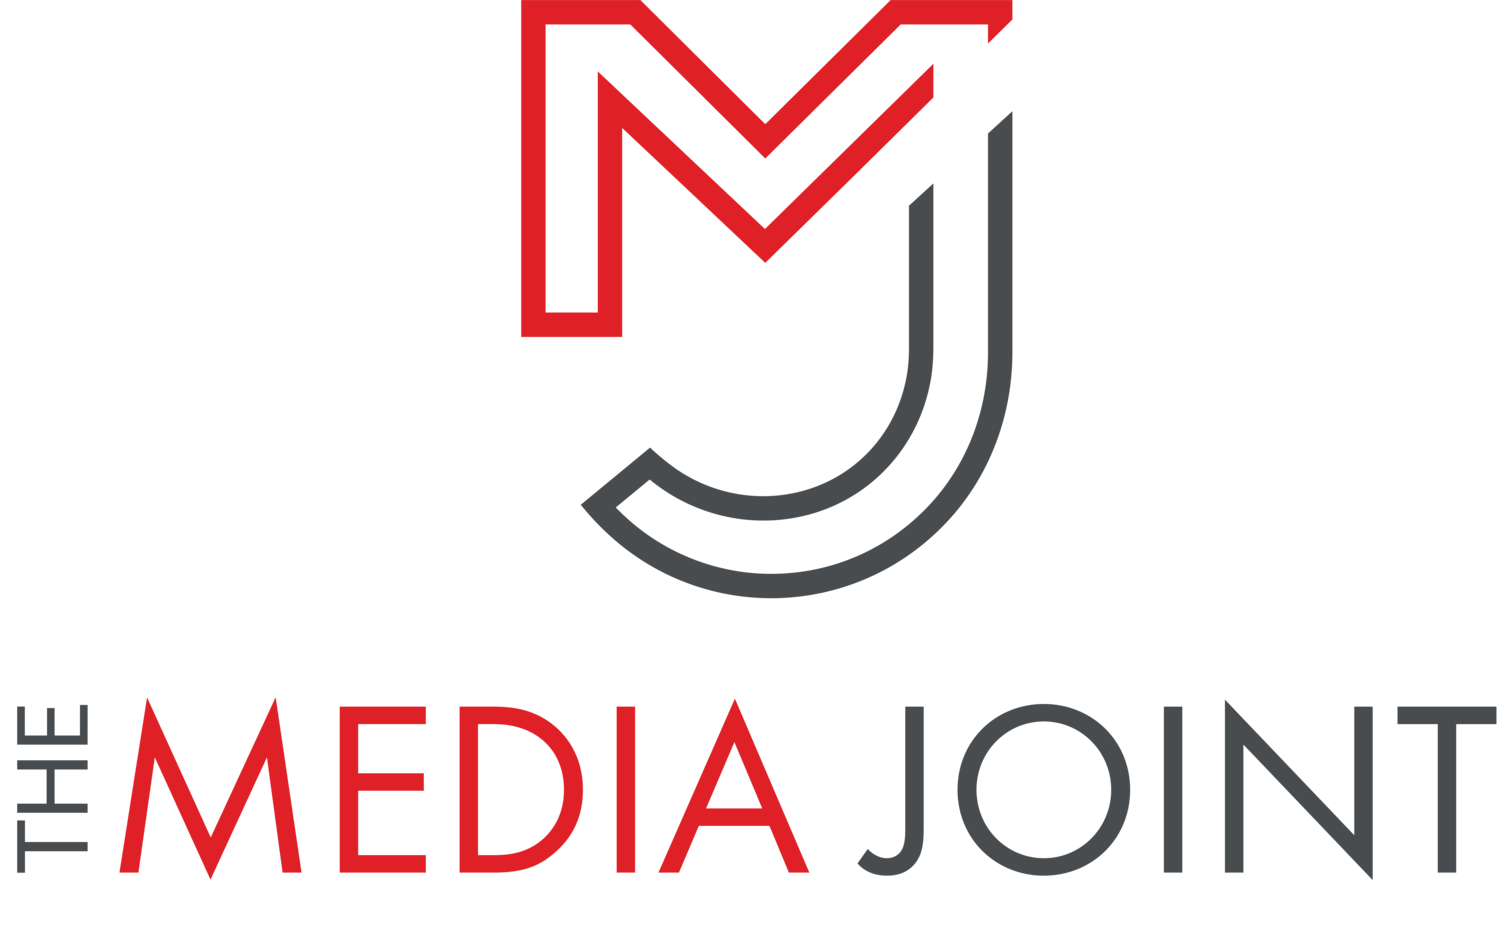 The Media Joint